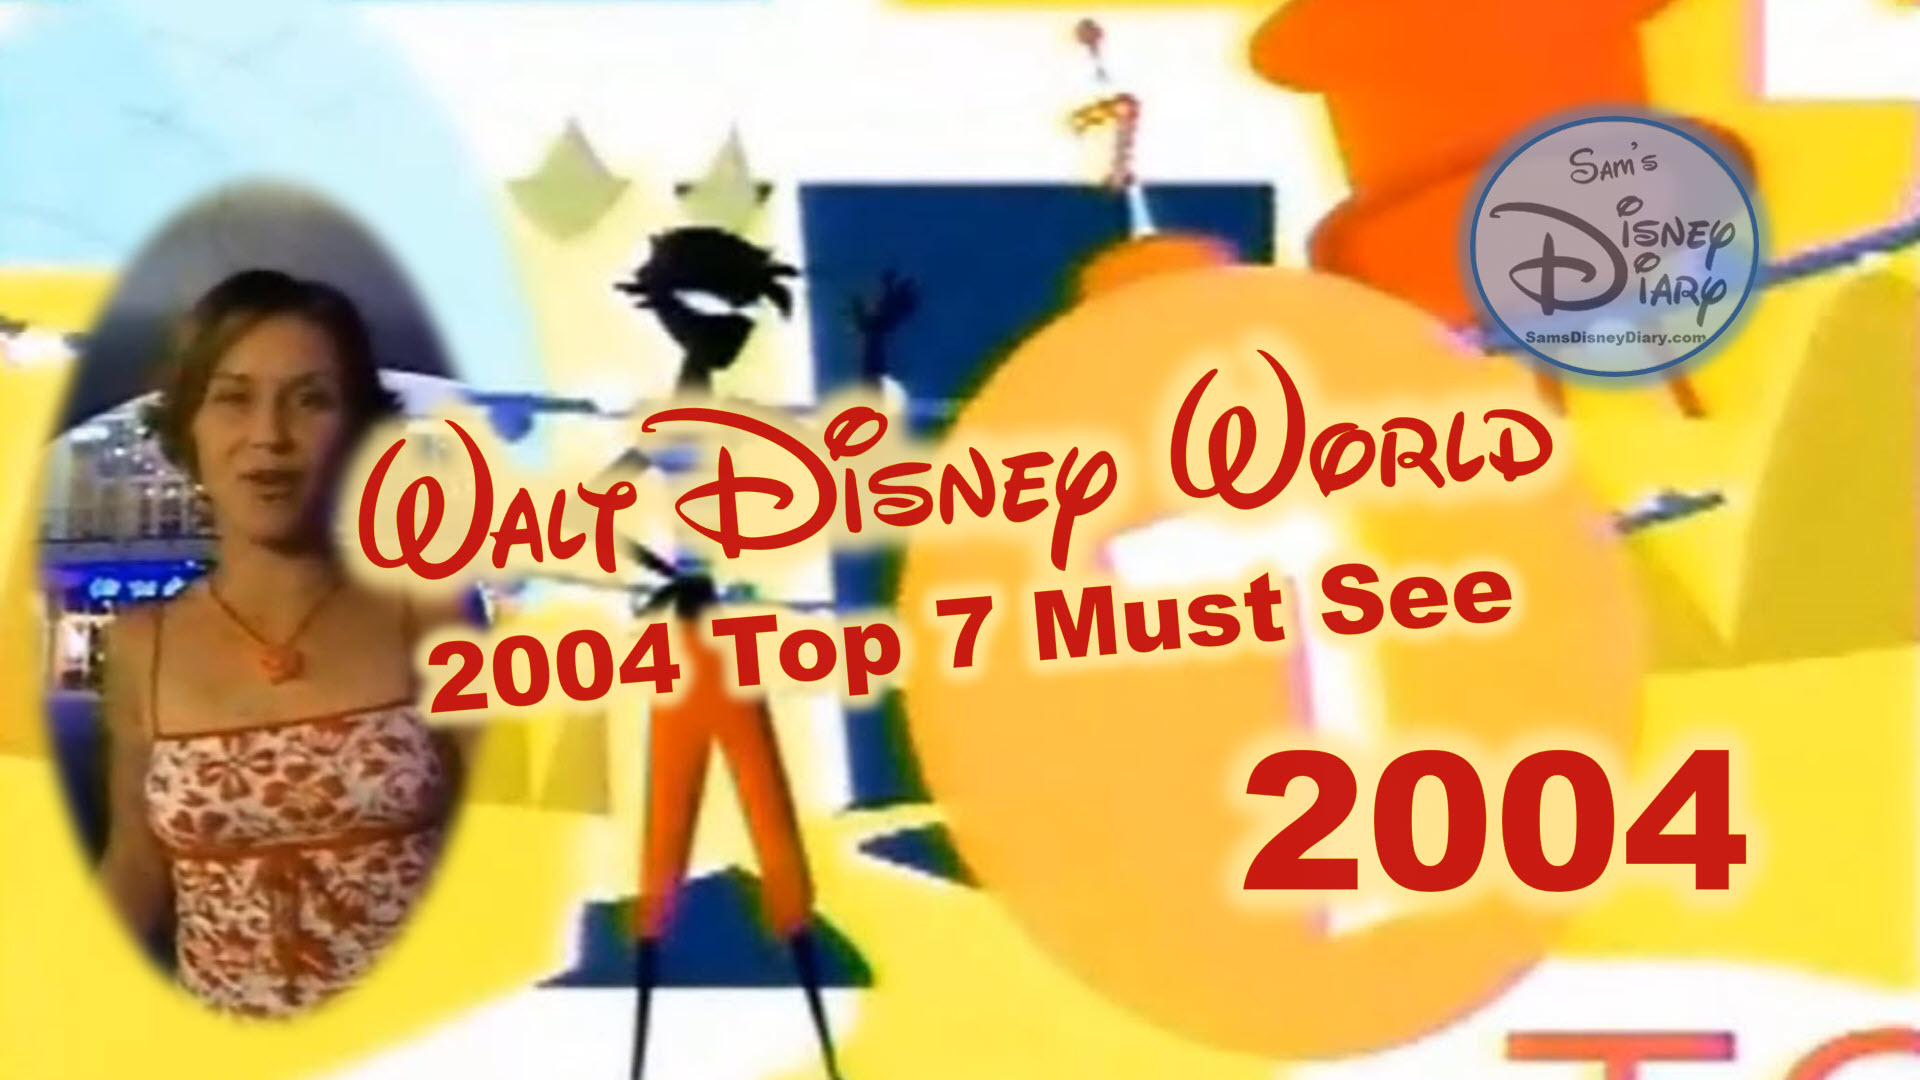 2004 Top 7 Must See